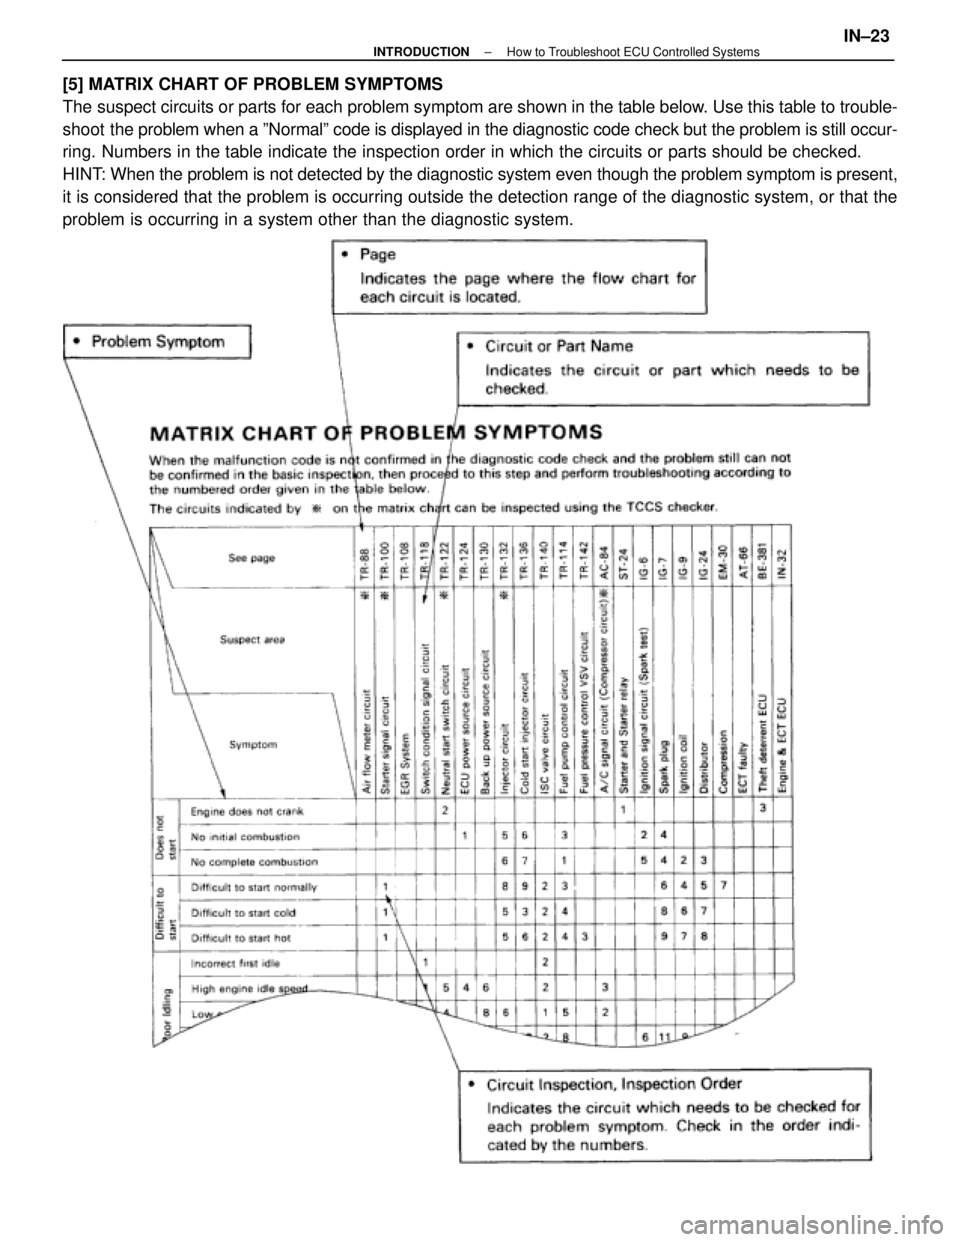 LEXUS SC300 1991  Service Owners Manual 
[5] MATRIX CHART OF PROBLEM SYMPTOMS
The suspect circuits or parts for each problem symptom are shown in the tab\
le below. Use this table to trouble-
shoot the problem when a ºNormalº code is disp